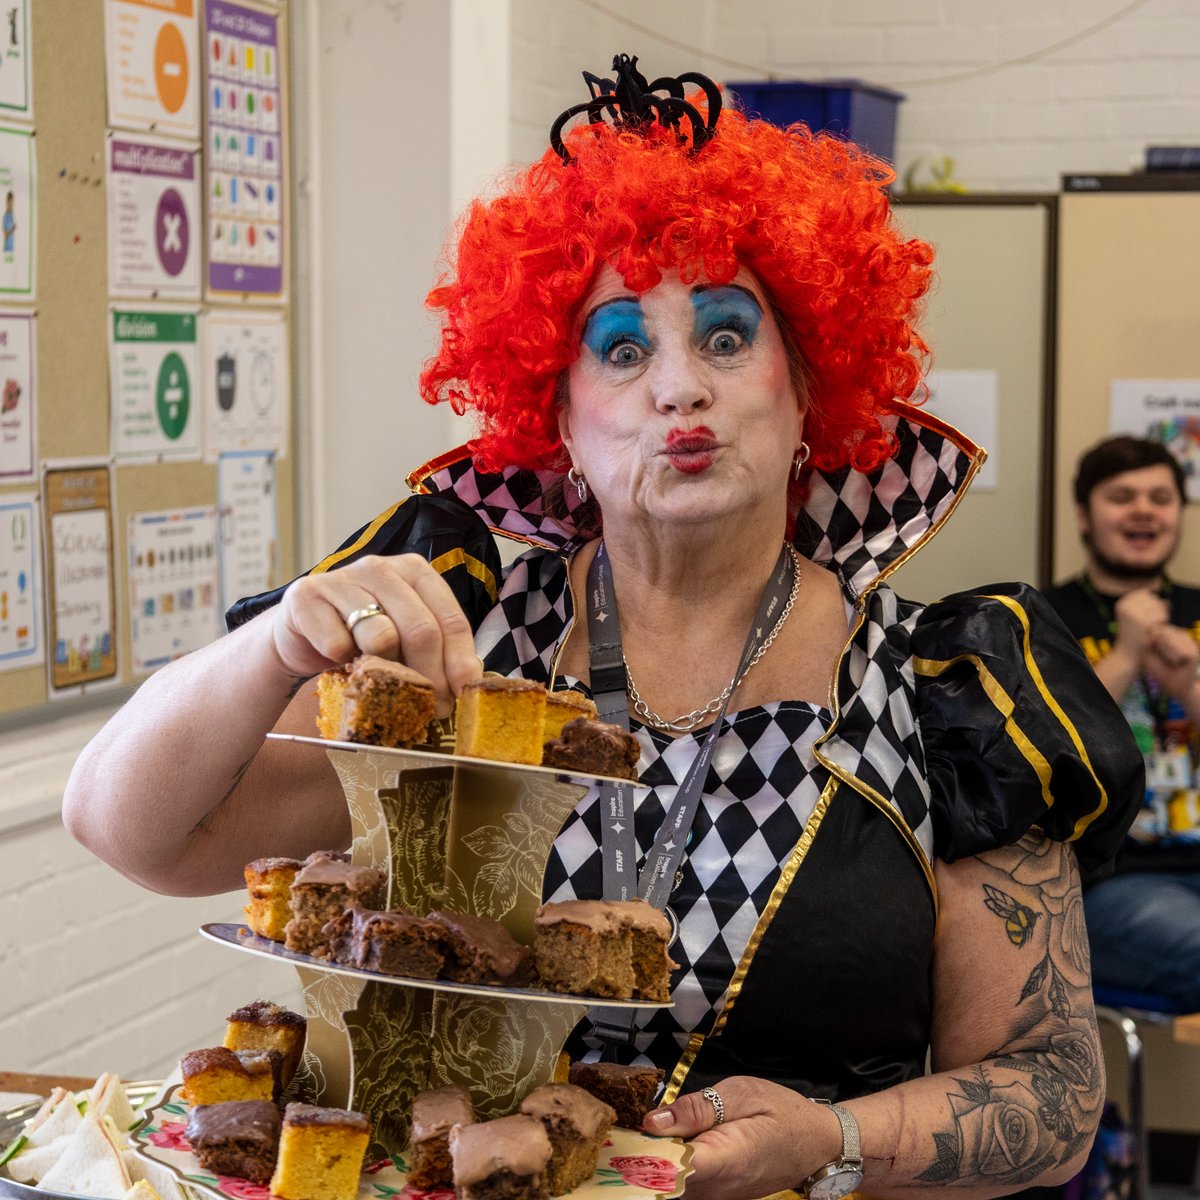 In honour of #WorldBookDay, our Inclusive Learning department hosted a World Book Day Café! It was a chance for students to build communication and teamwork skills, all while celebrating their favourite books. Staff joined in the fun by dressing up as beloved characters!